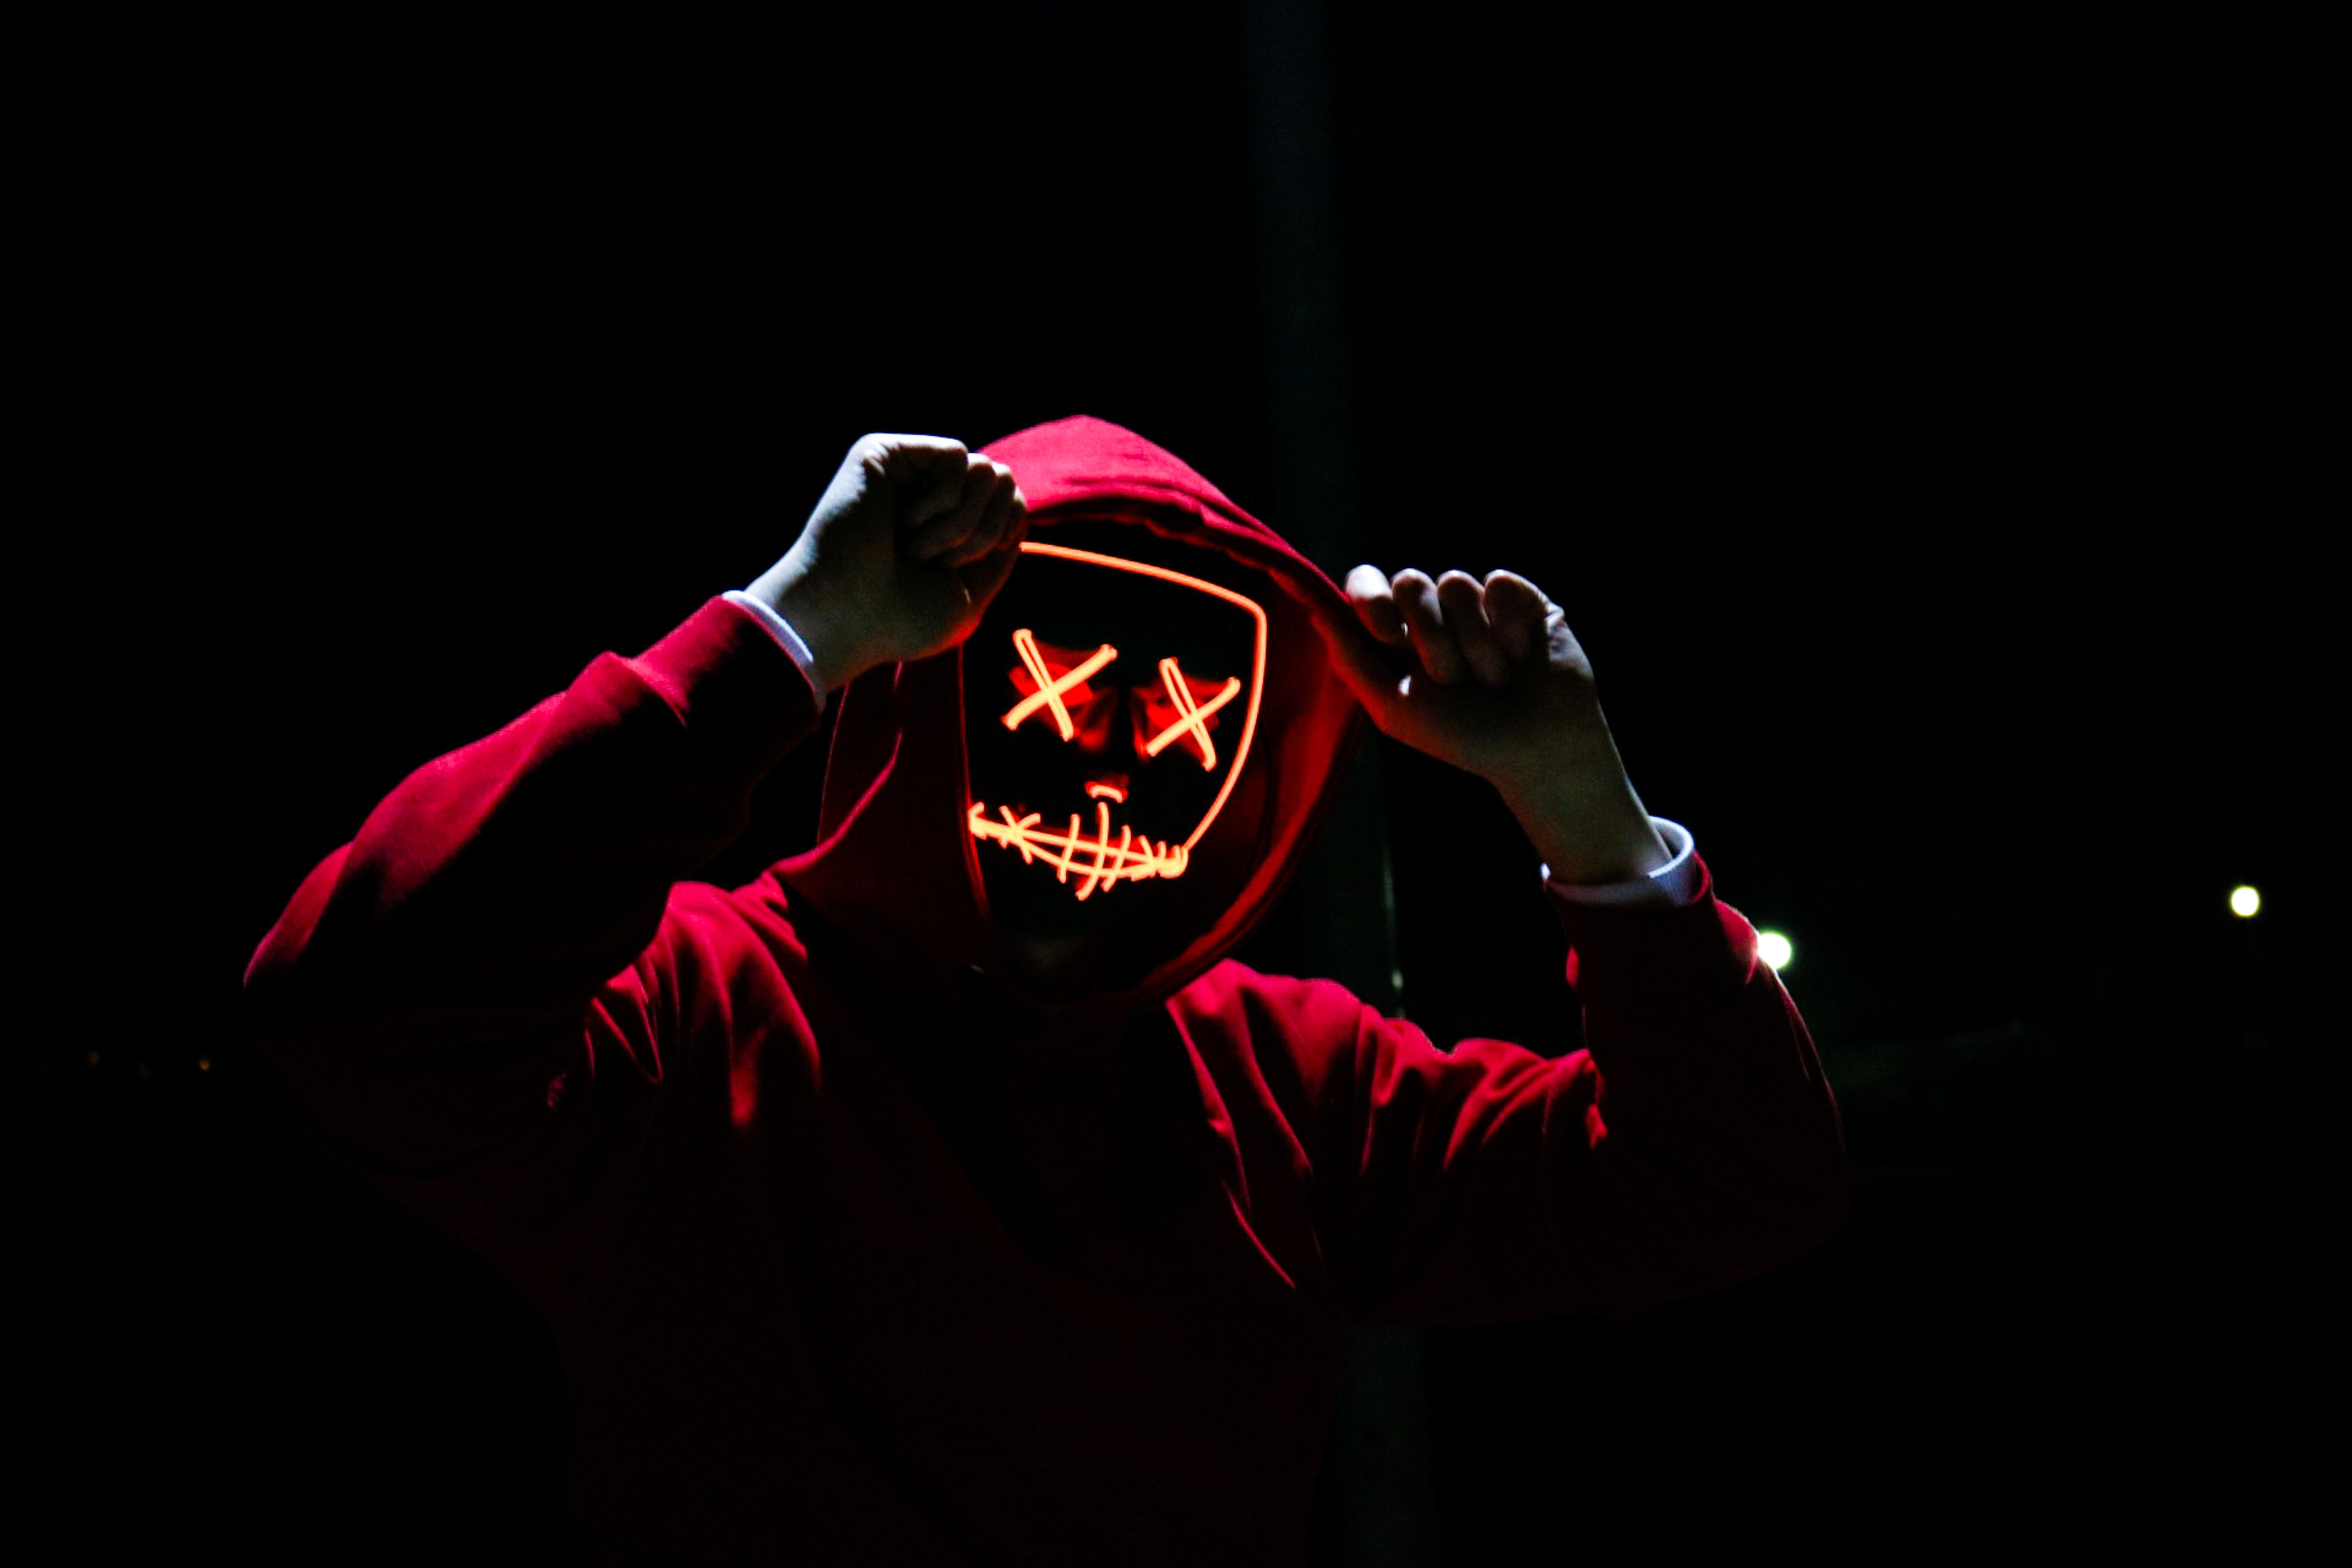 5999x3999 #red, #skull face, #mask, #illustration, #cool, #illuminated, #dead, #lines, #creepy, #halloween pumpkin, #Free picture, # halloween, #hoodie, #dark background, #neon light, #face, #light, #person, #angry, #skull, #dark. Mocah.org HD